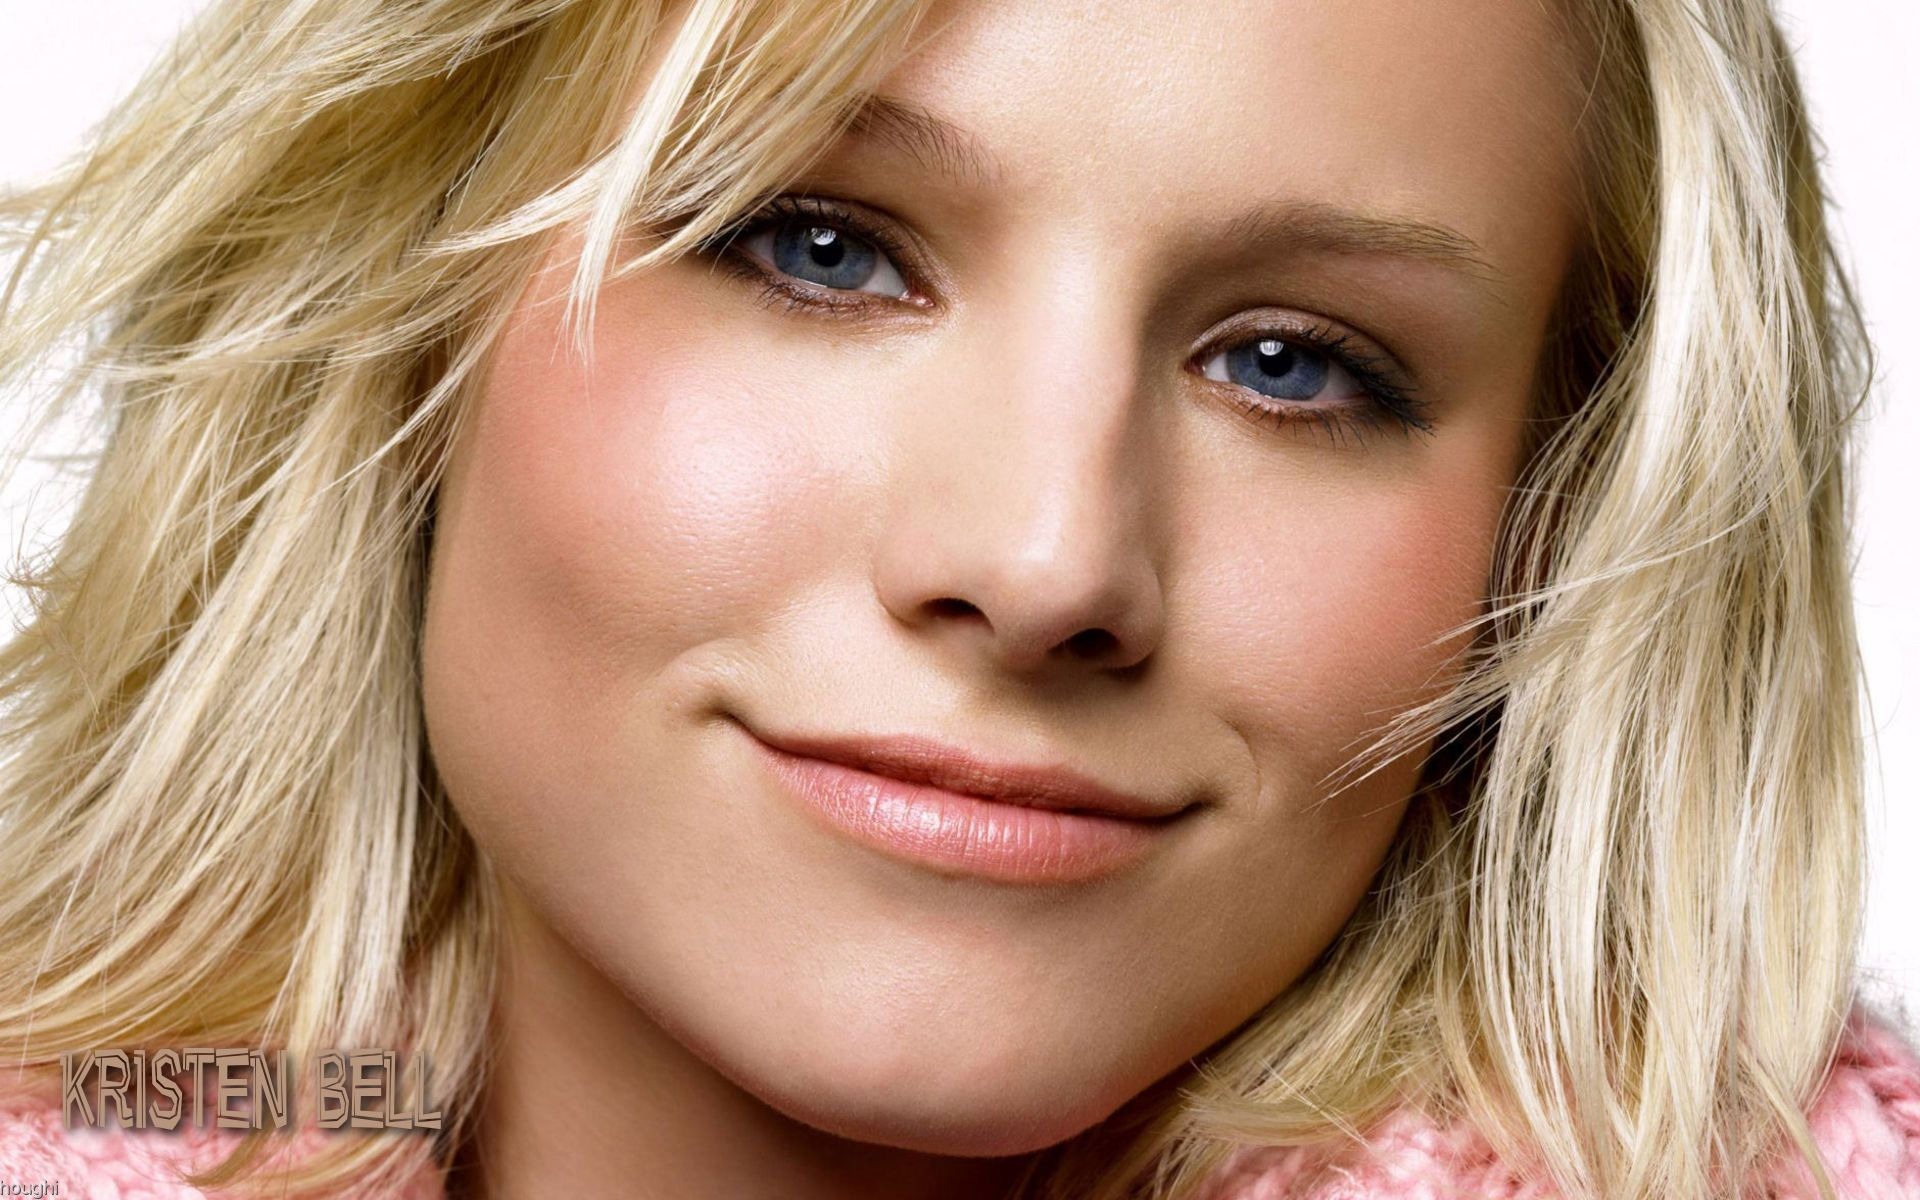 Kristen Bell #072 - 1920x1200 Wallpapers Pictures Photos Images